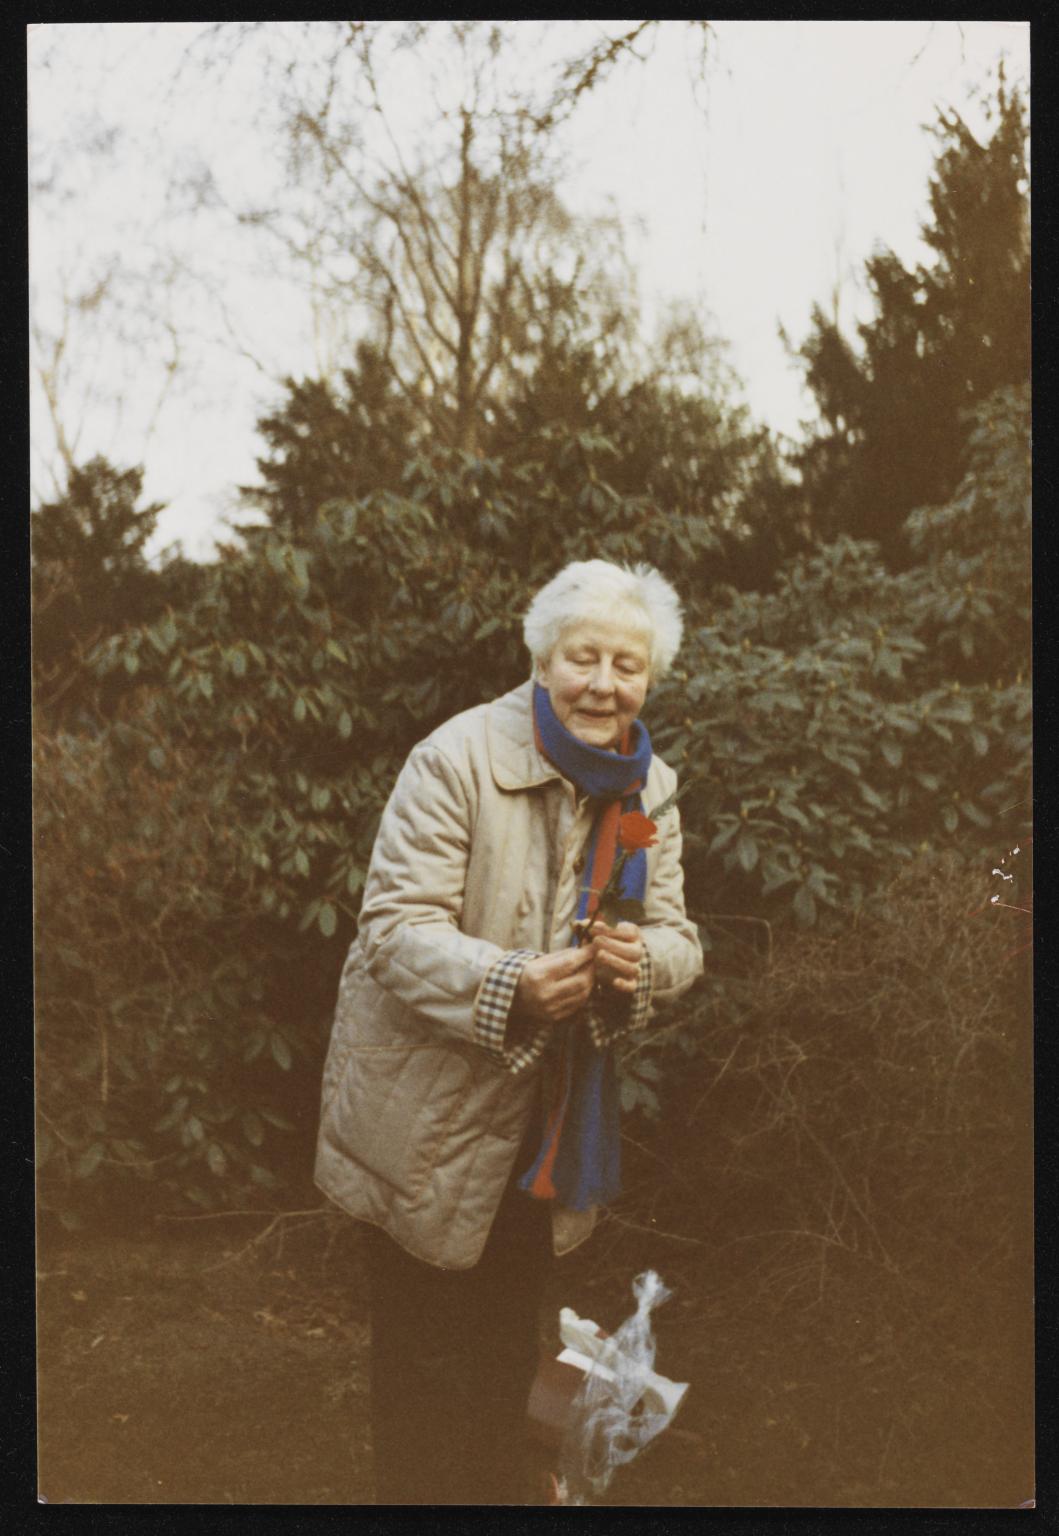 Photograph of Edith Thomas in Hanover putting a red rose